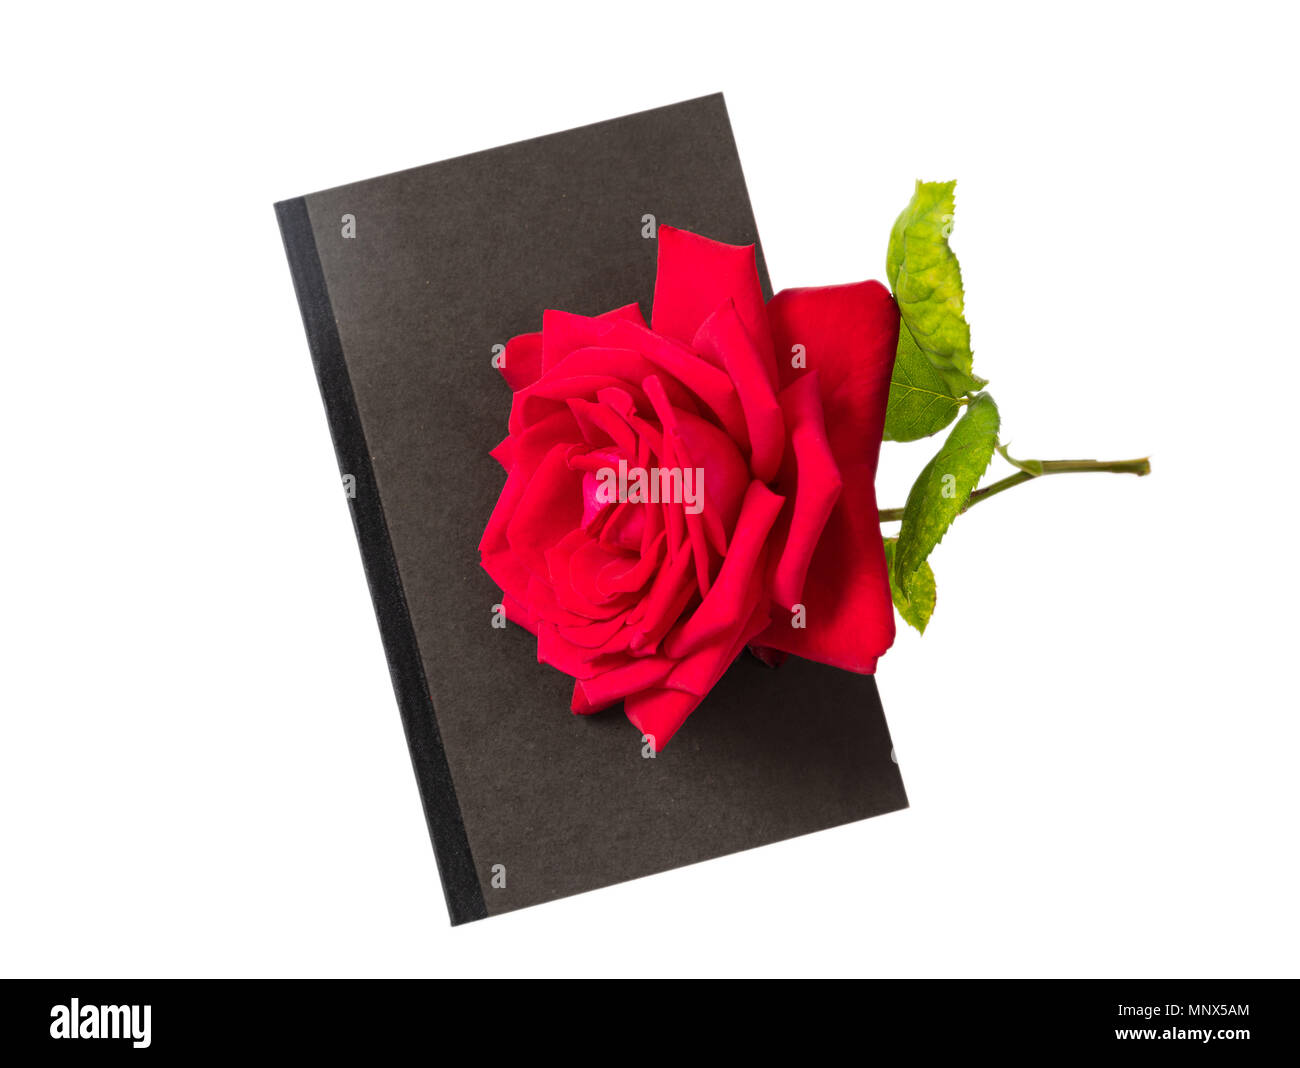 Rose red flower with green leaves and stem and a black diary book on a white background, top view Stock Photo